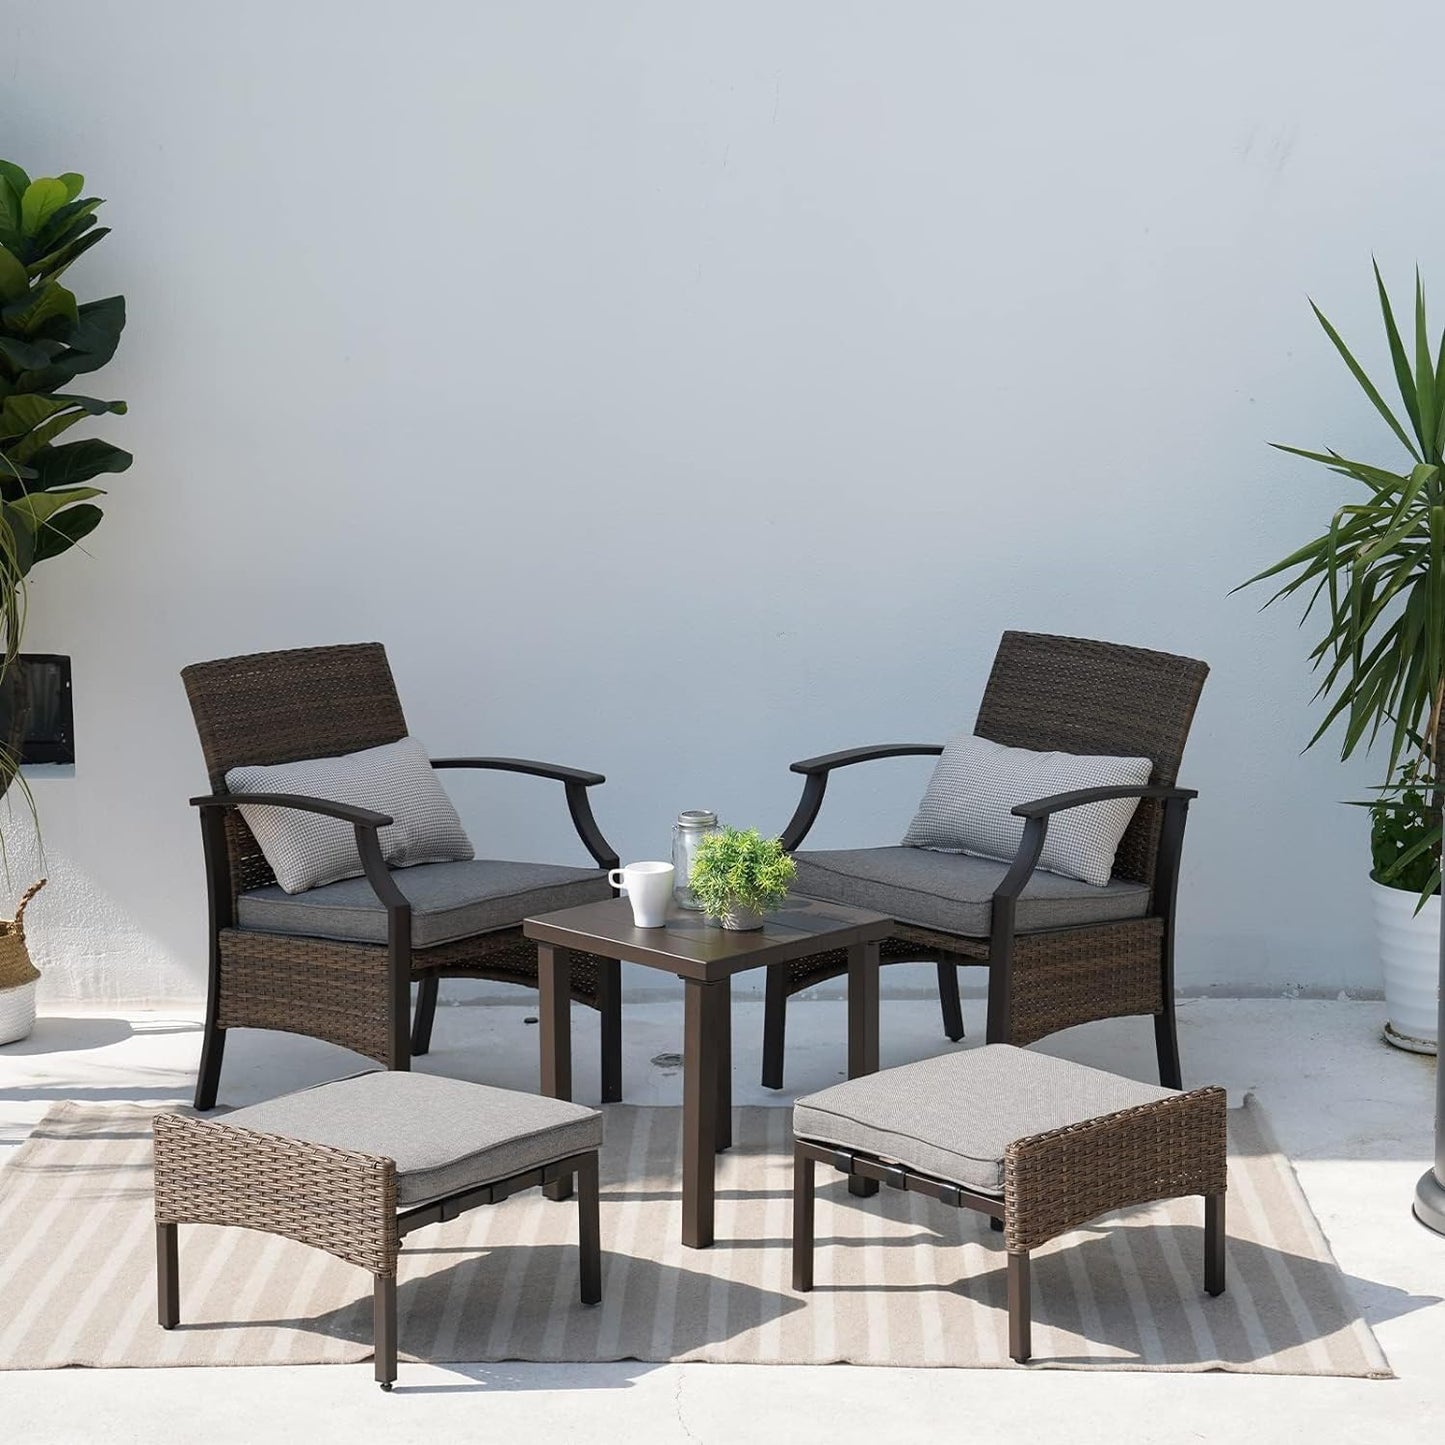 5-Piece Outdoor Furniture Sets Weather-Resistant Wicker Steel Outdoor Patio Chairs with Olefin Cushions Ottomans and Coffee Table for Balcony Backyard Garden Poolside- Gray